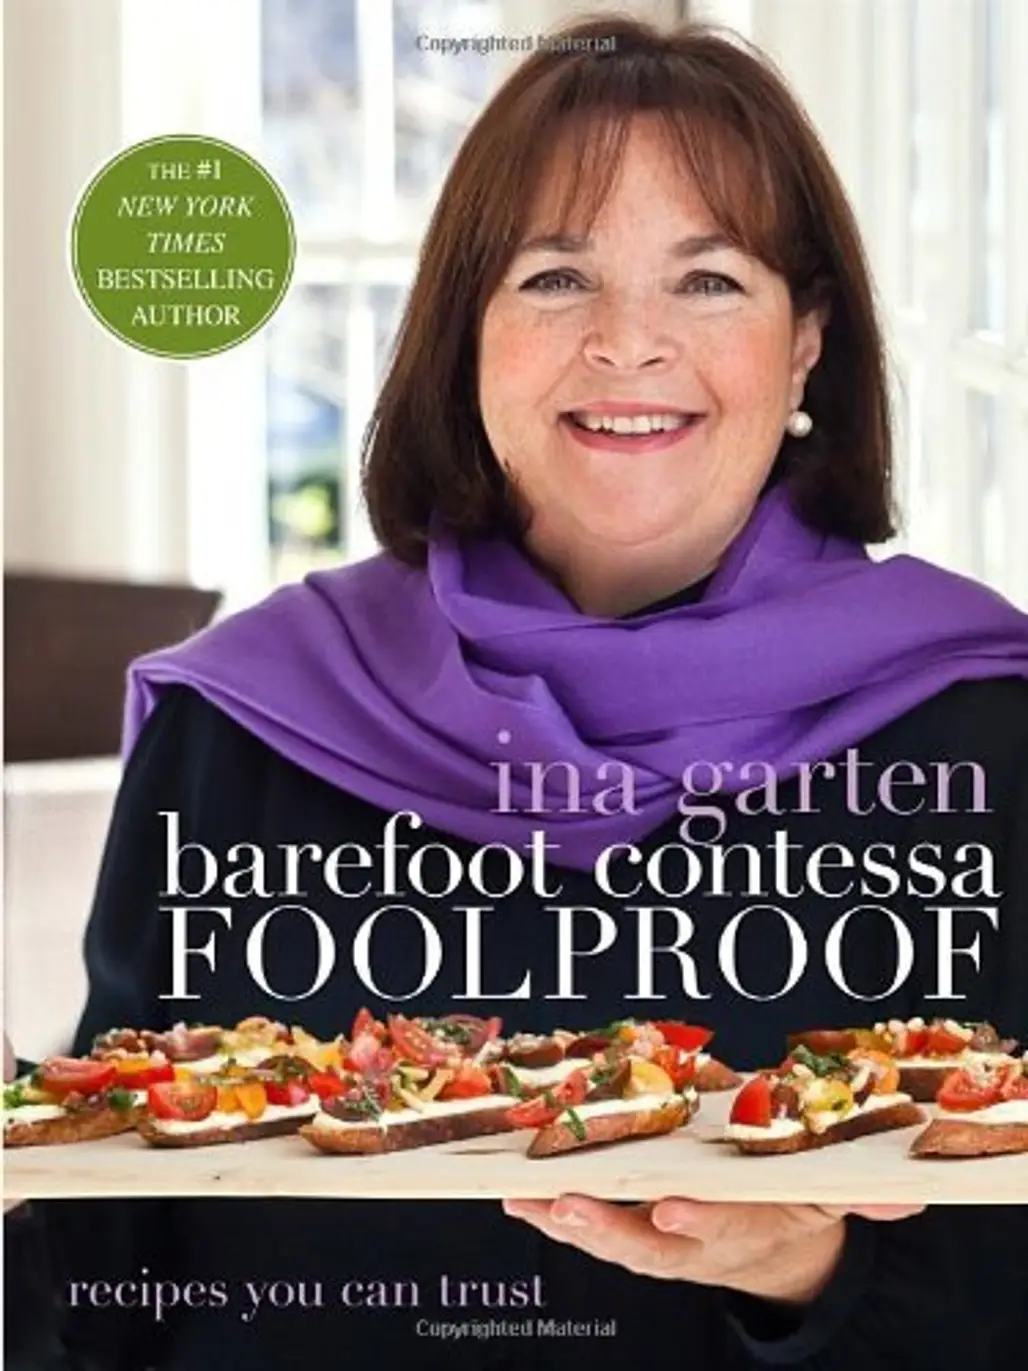 Foolproof by Ina Garten (the Barefoot Contessa)